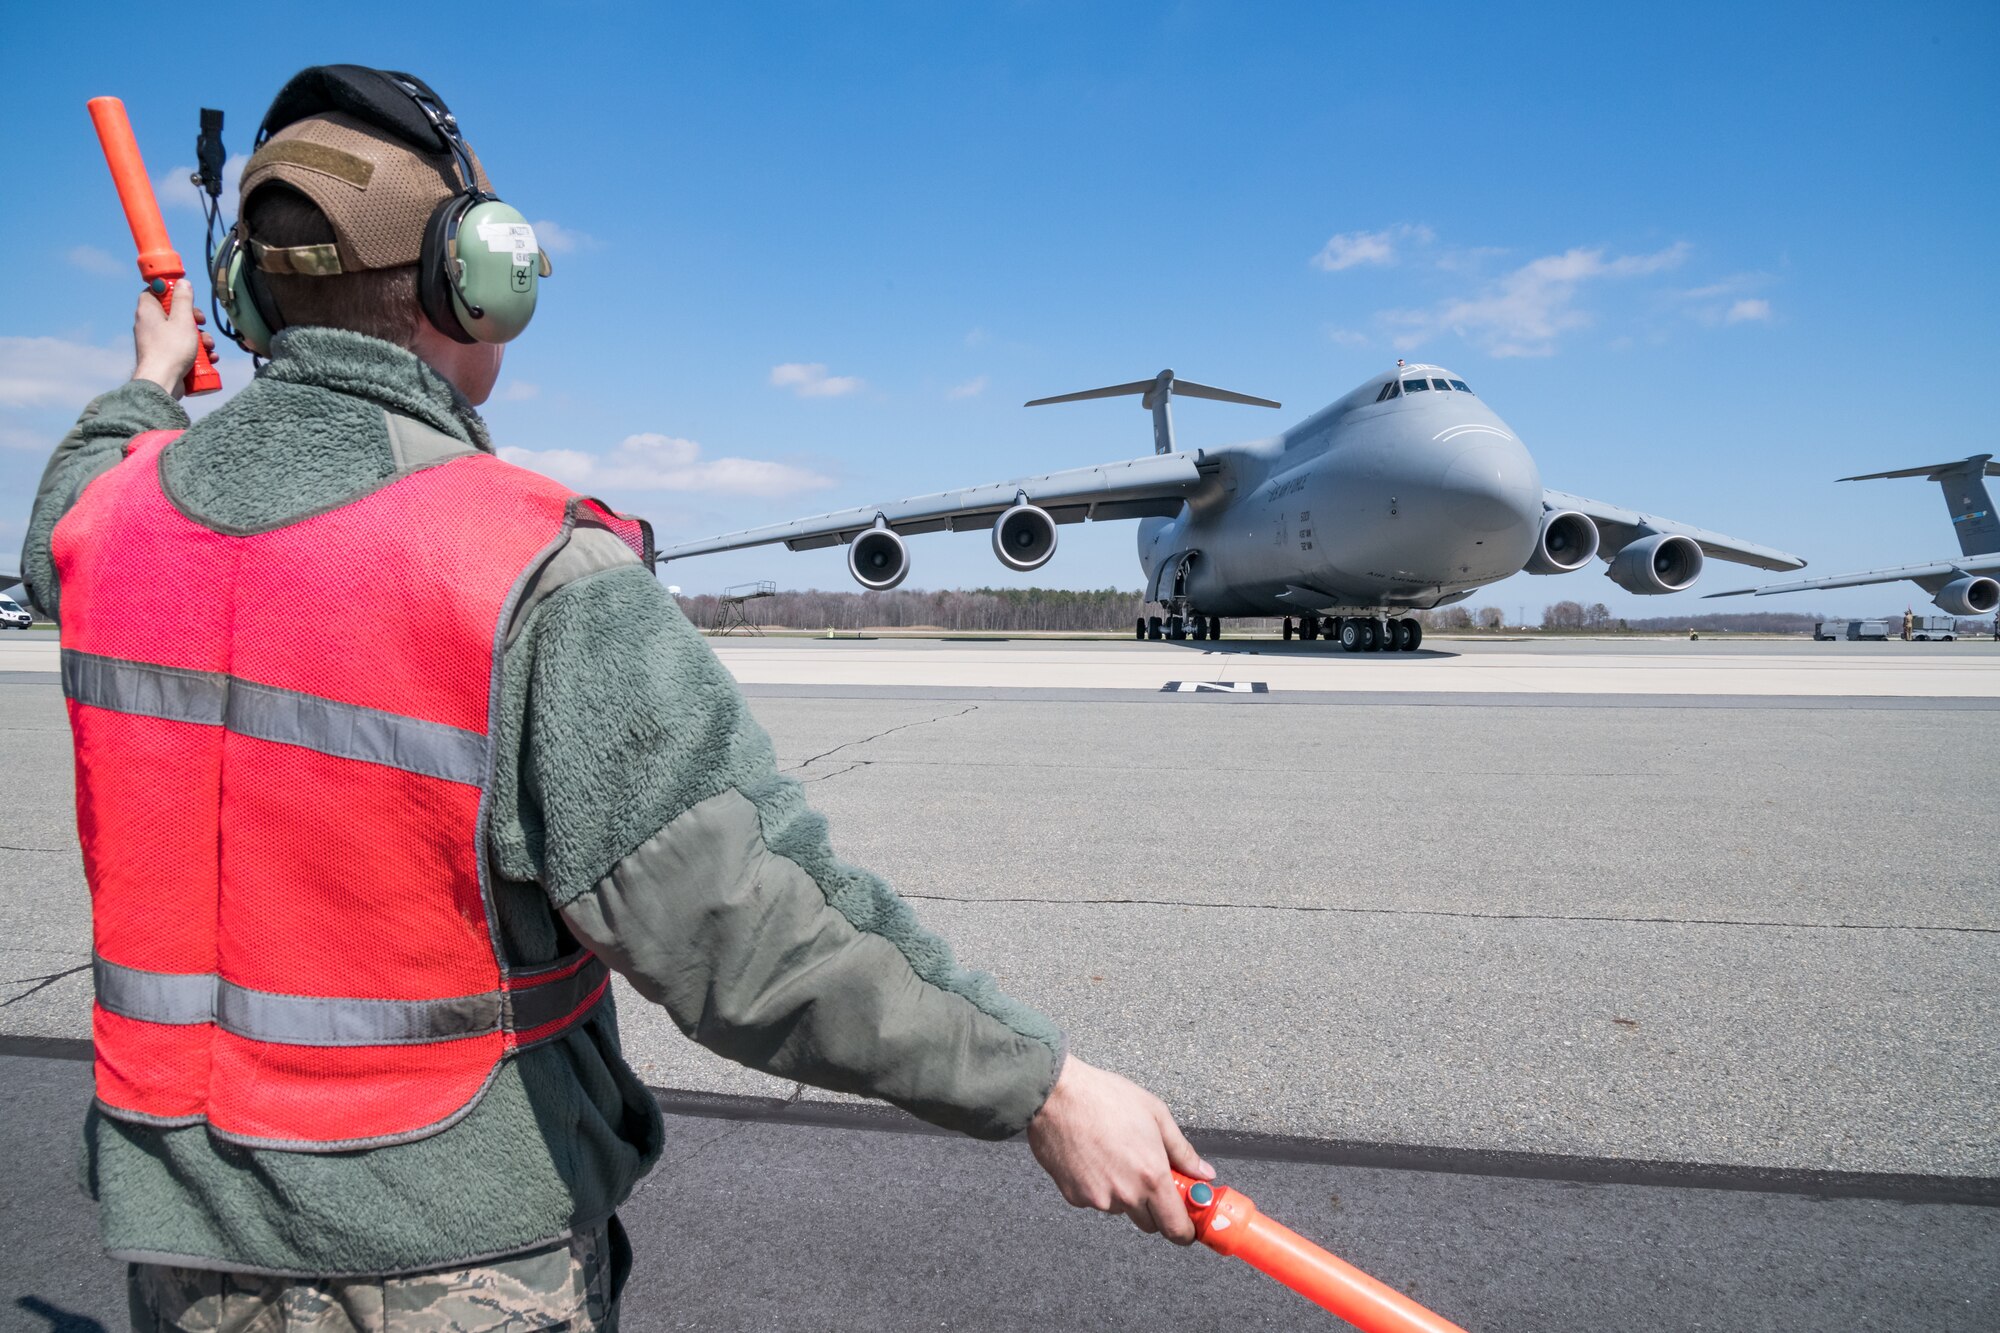 Senior Airman Jeffrey Mazzotta, 436th Aircraft Maintenance Squadron hydraulics journeyman, marshals a C-5M Super Galaxy off it's parking spot March 26, 2020, on Dover Air Force Base, Delaware. Mazzotta and other members of his launch crew wore approved Operational Camouflage Pattern (OCP) bump caps and observed social distancing practices, while performing maintenance on the Super Galaxy. (U.S. Air Force photo by Roland Balik)